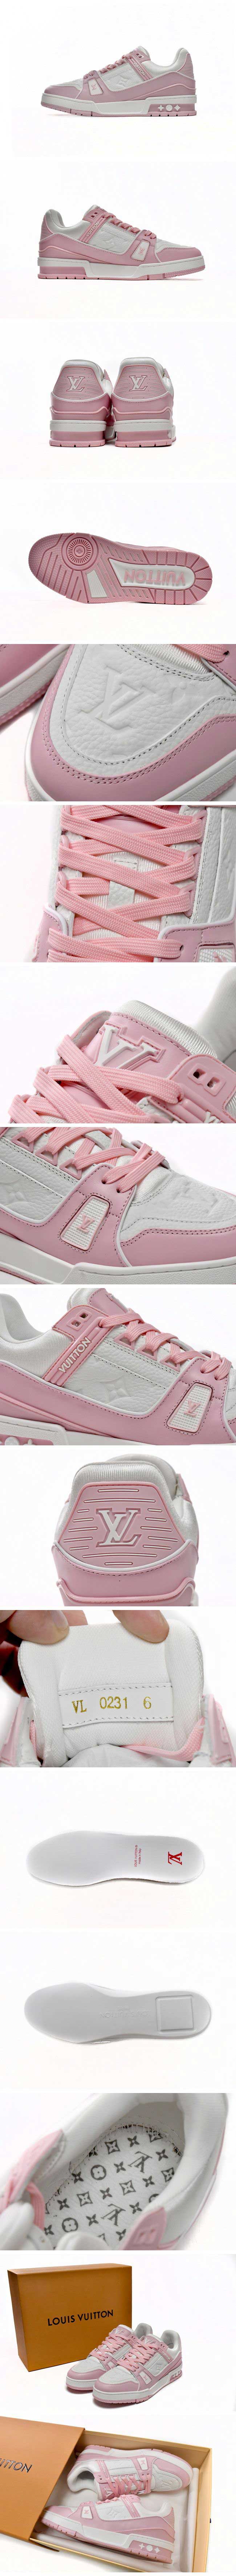 Louis Vuitton Trainer Rose Pink ルイヴィトン トレーナー ローズ ピンク